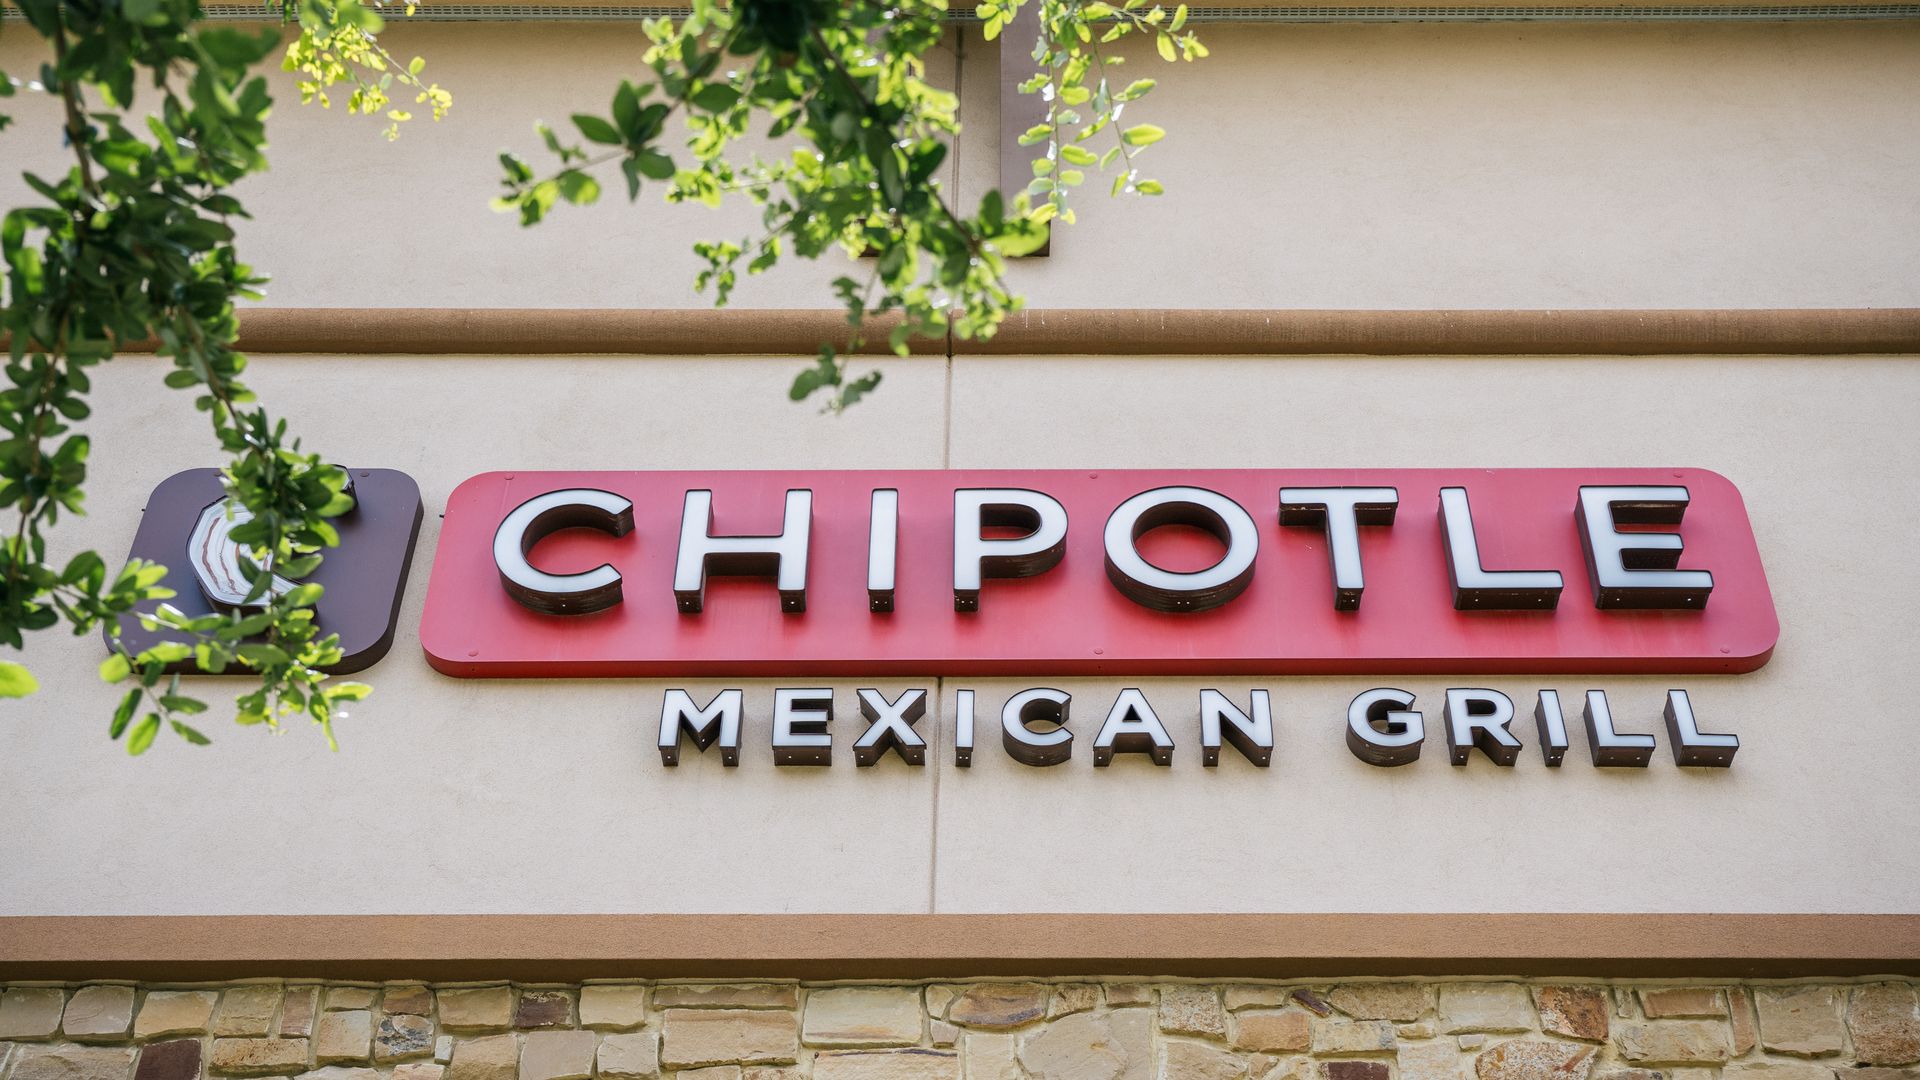 Chipotle Mexican Grill sign on a building's exterior